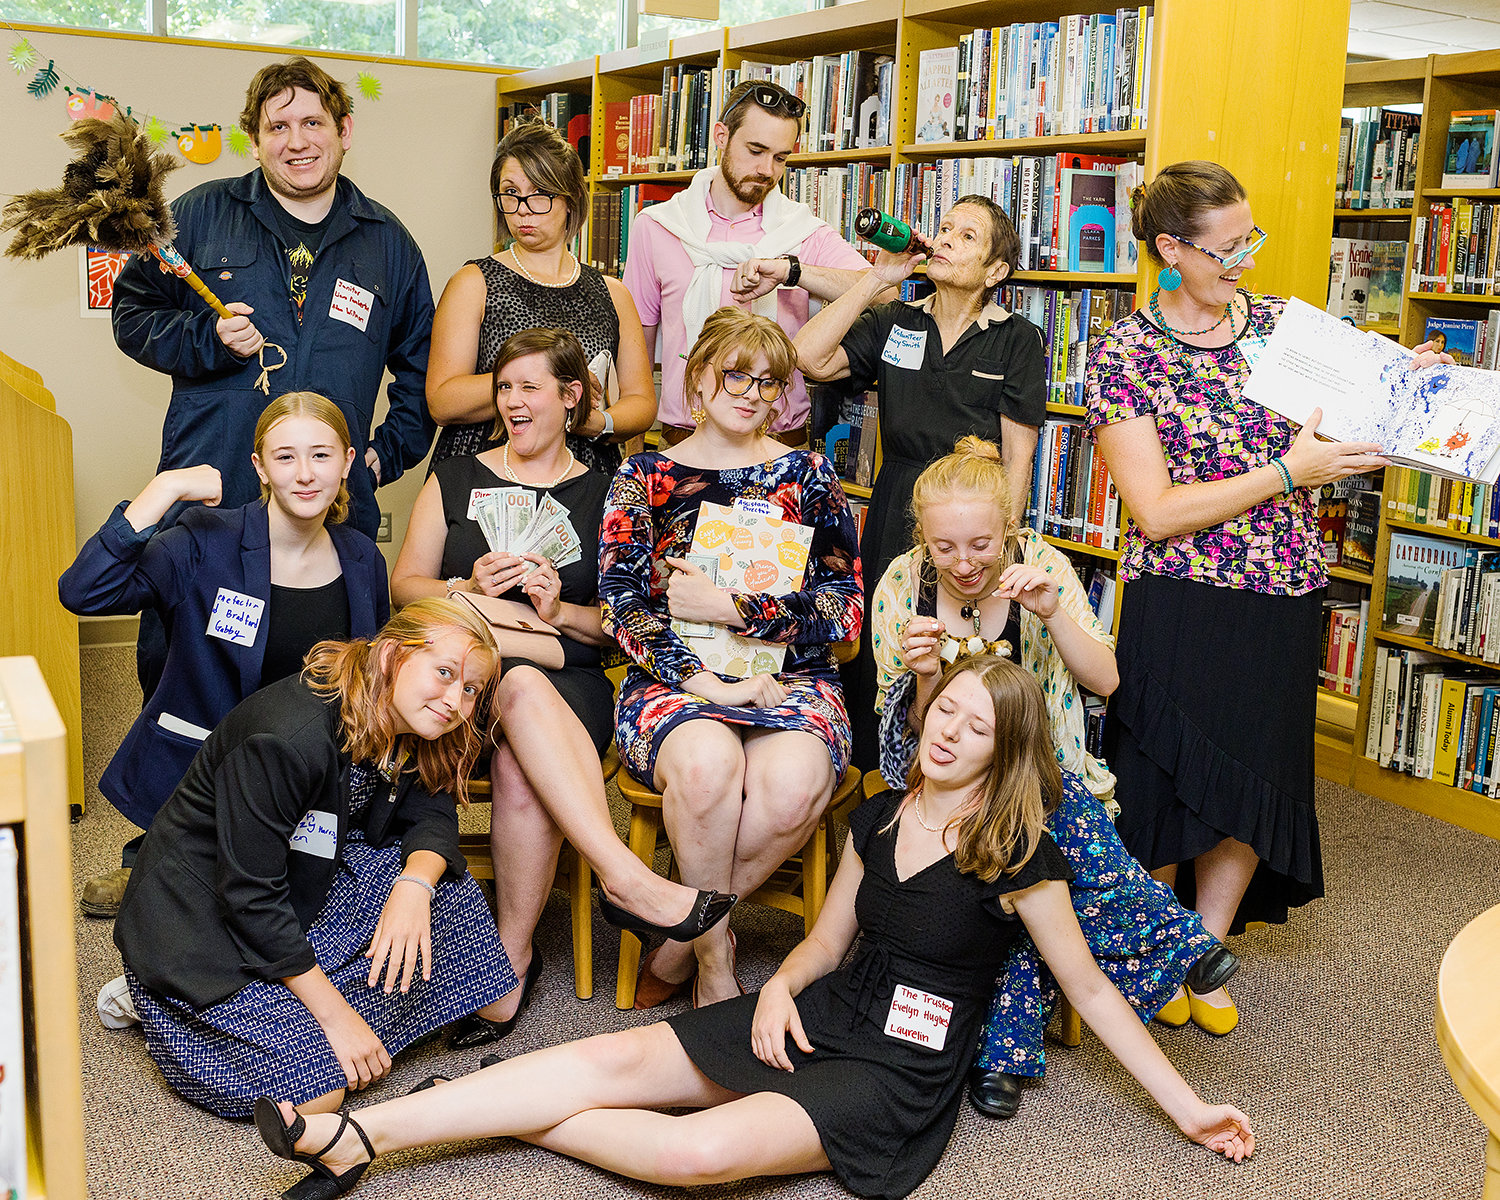 The Cast & Characters from left to right: (top row): Adam Willmore (janitor), Megan Harris (library founder), Shane Ryan (author), Lucinda Duncan (library volunteer), and Carrie Geno (children’s librarian), (middle row): Gabrielle Geno (benefactor), Lisa Lundstrom (library director), Erin Campbell (library asst. director), and Jillian Clark (adult librarian), (bottom row): Wren Harris (clerk), and Laurelin Geno (trustee).